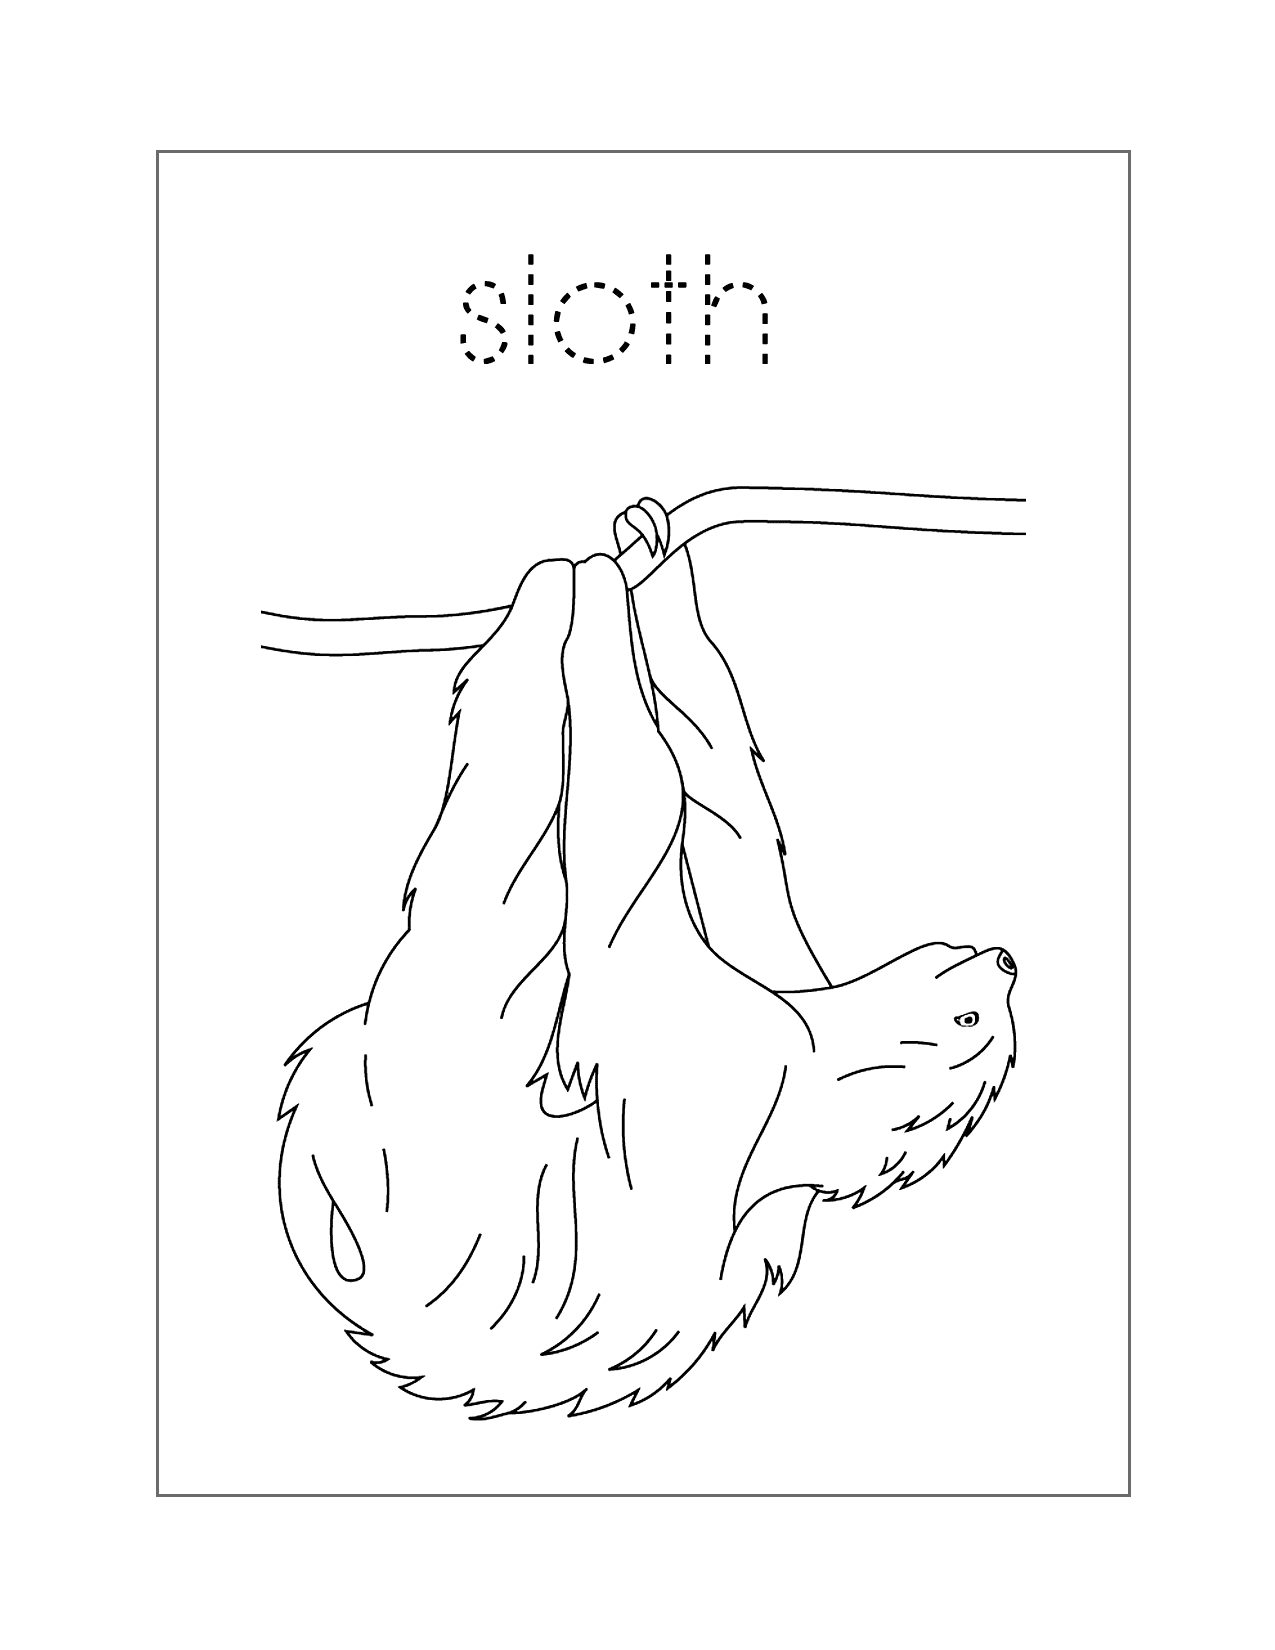 Sloth Spelling Coloring Sheet